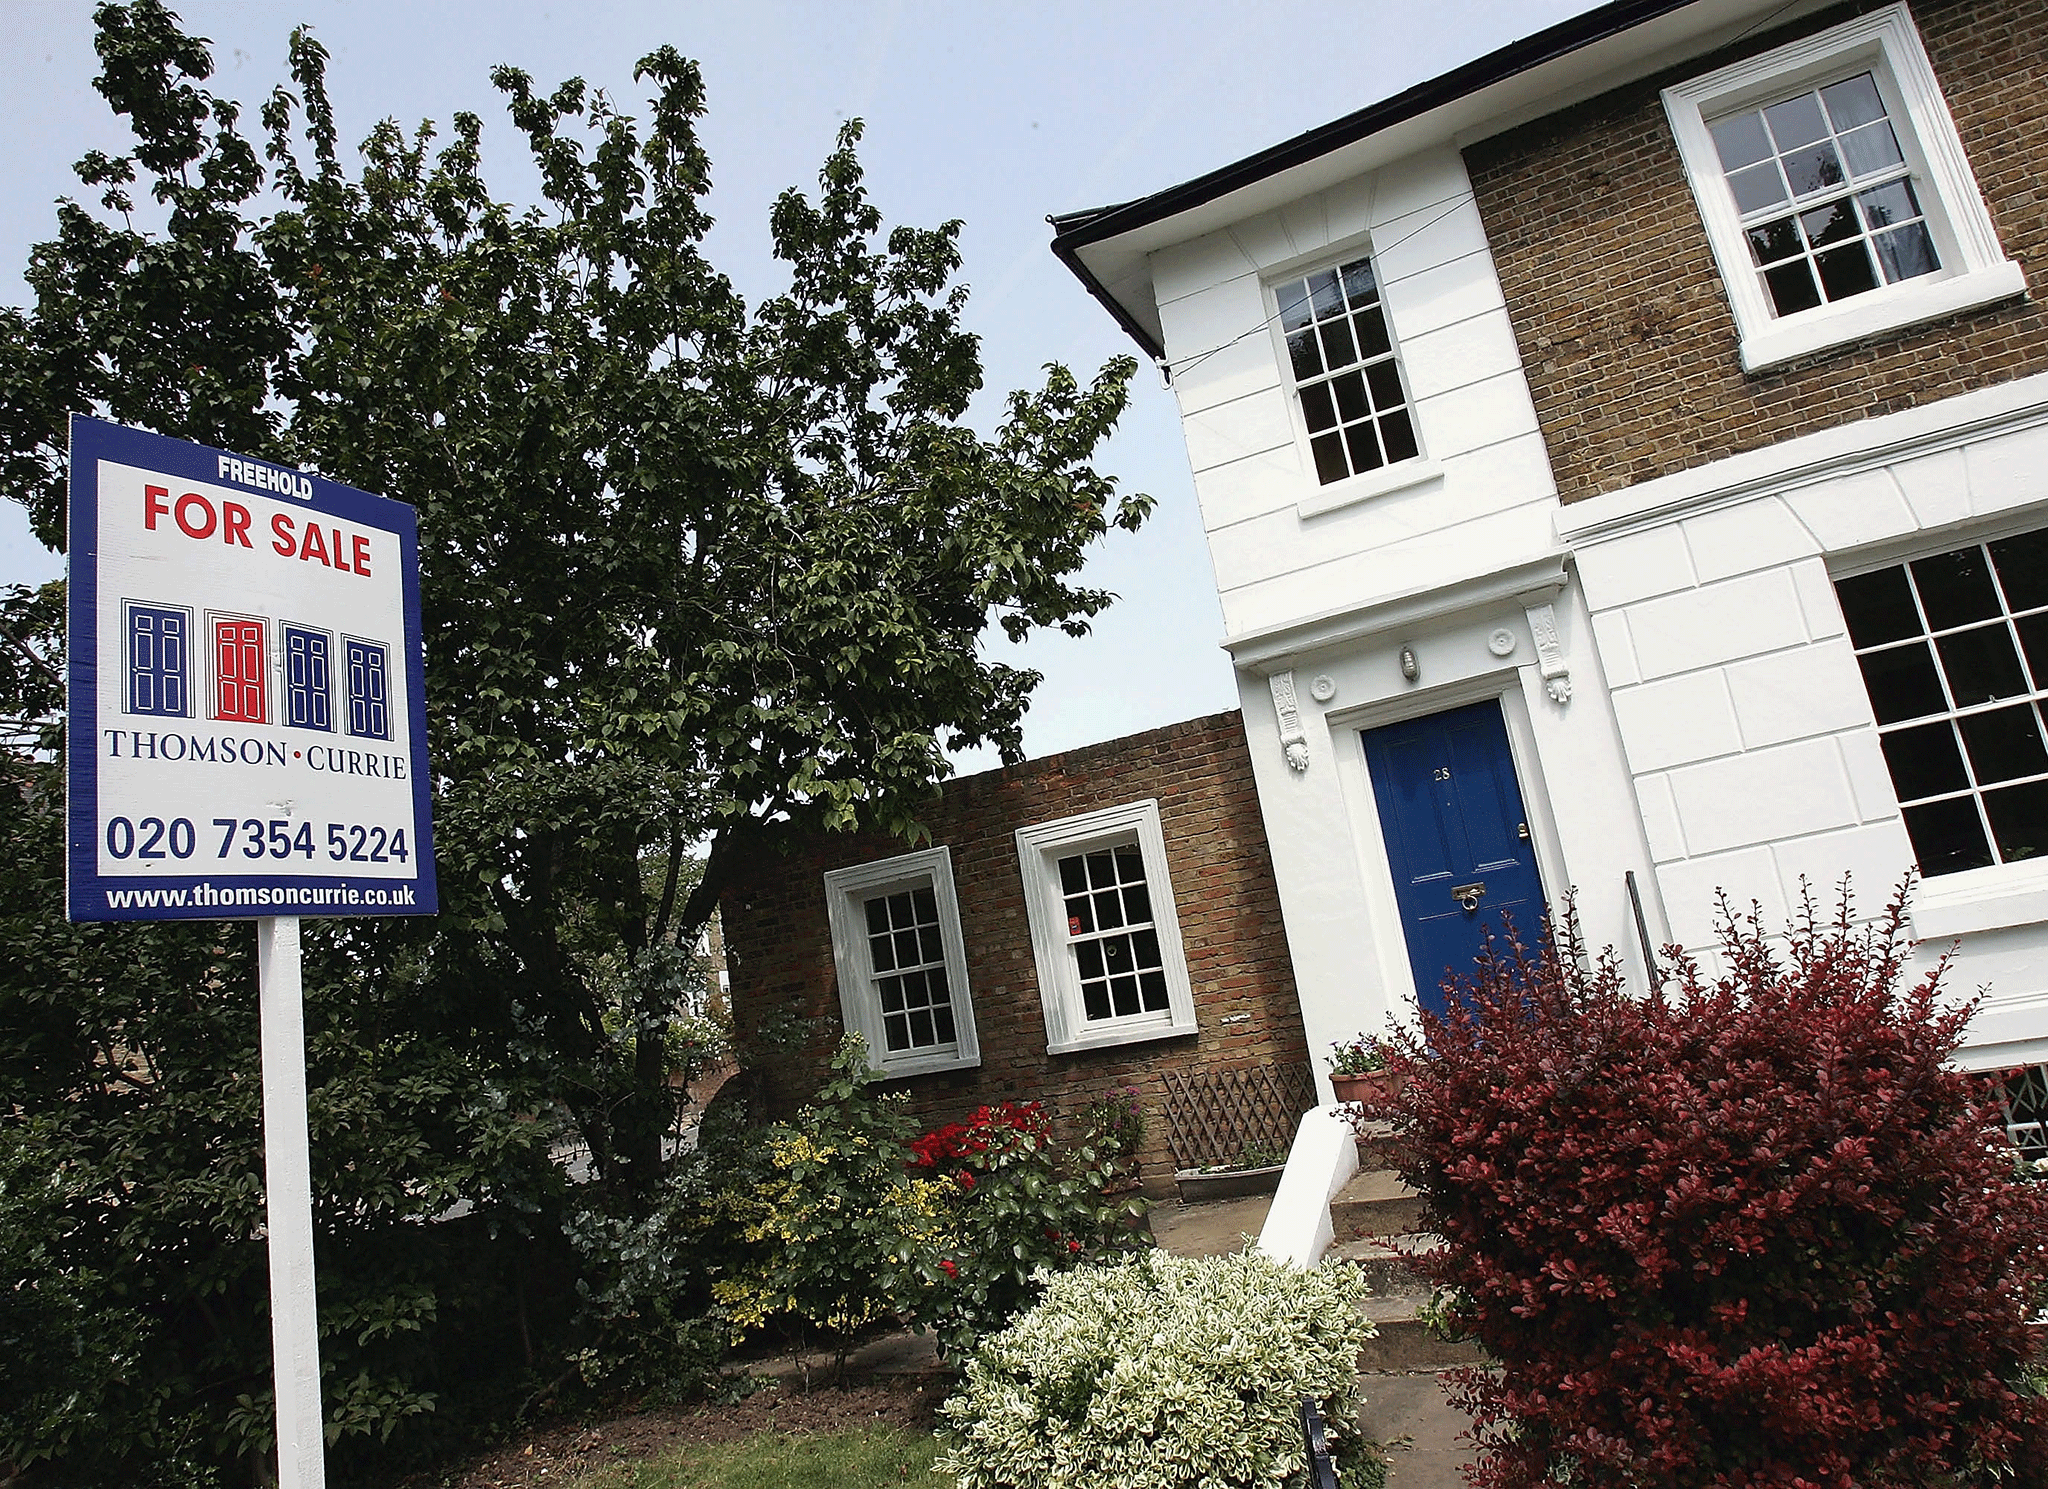 House price growth hits three year low, but buyers still priced out